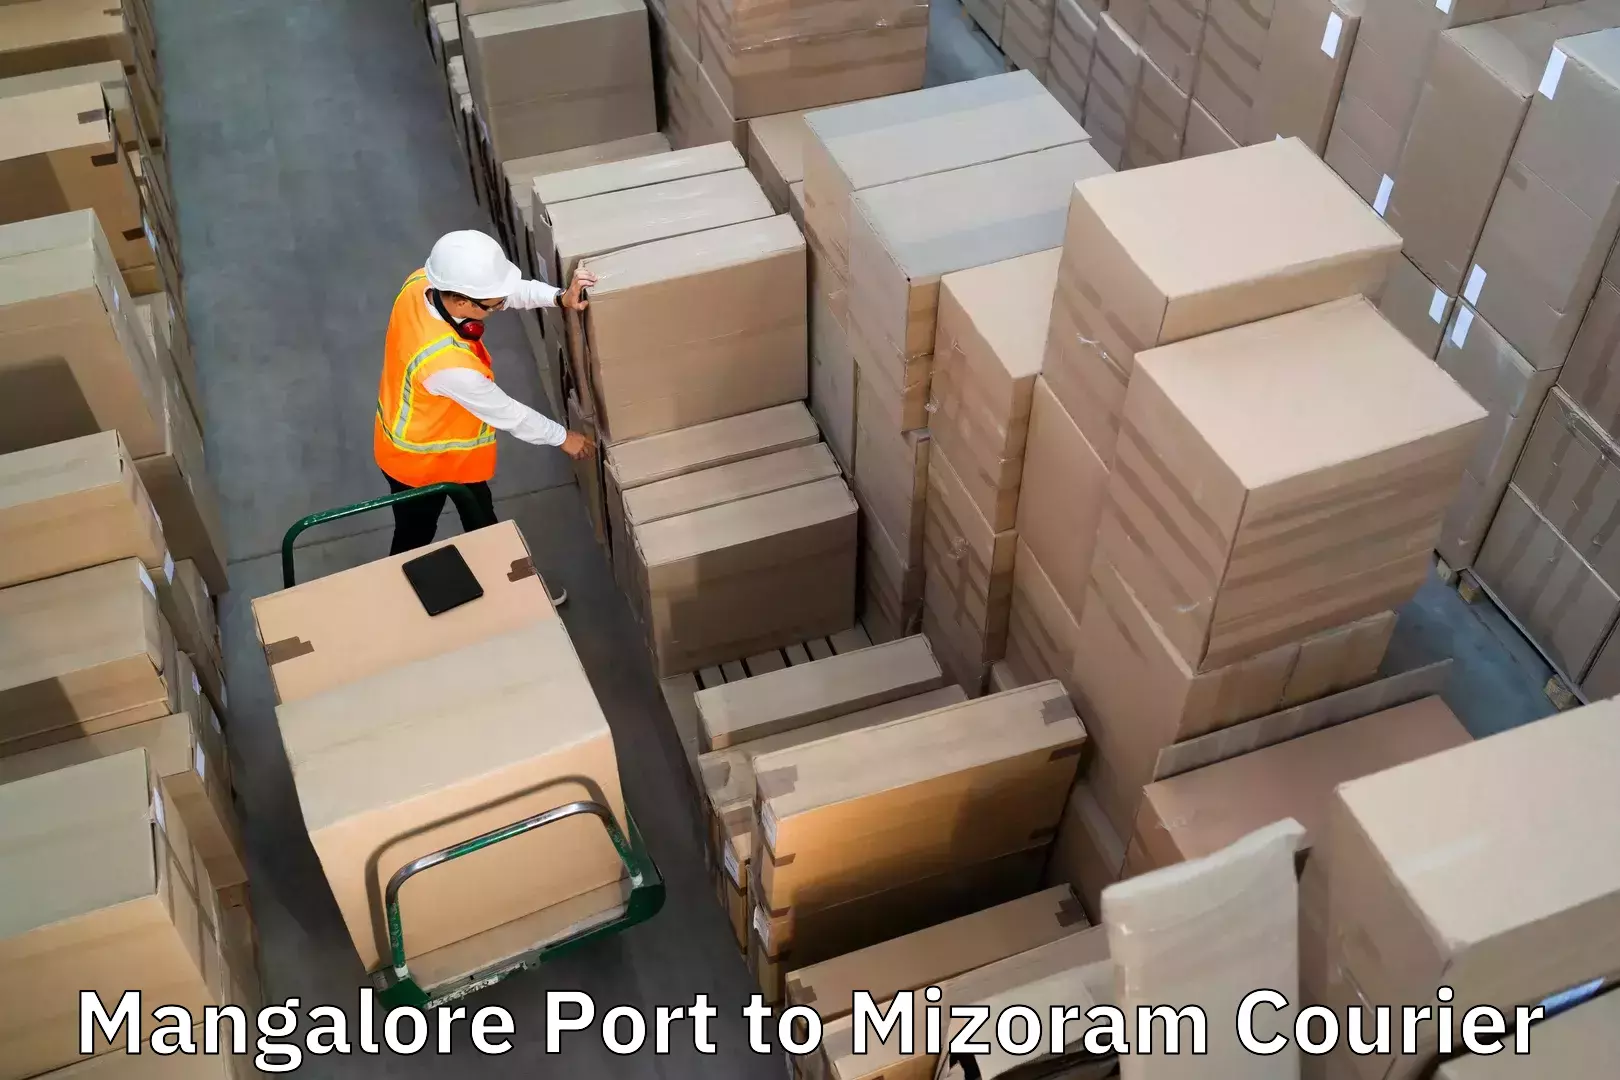 Luggage shipment specialists Mangalore Port to Siaha